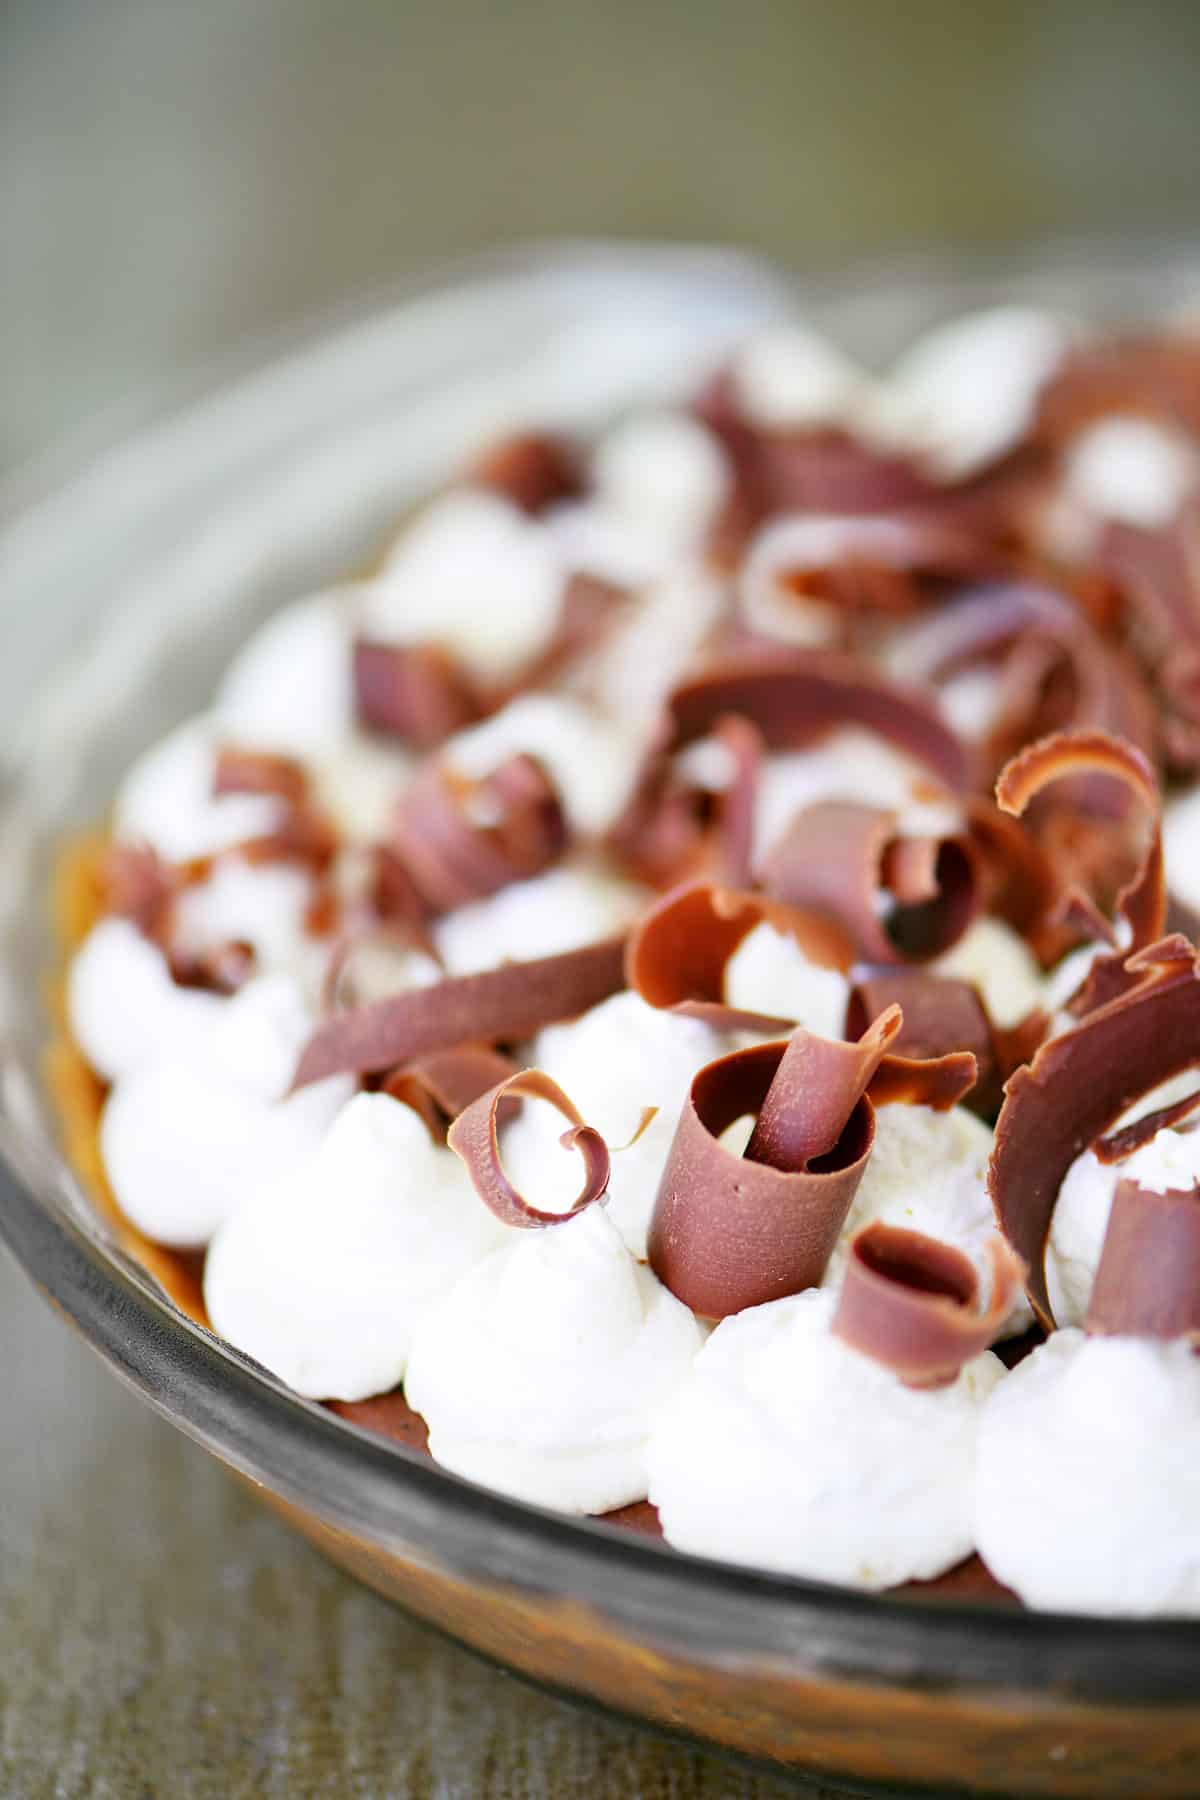 A pie with curled chocolate shaving and whipped cream on top.